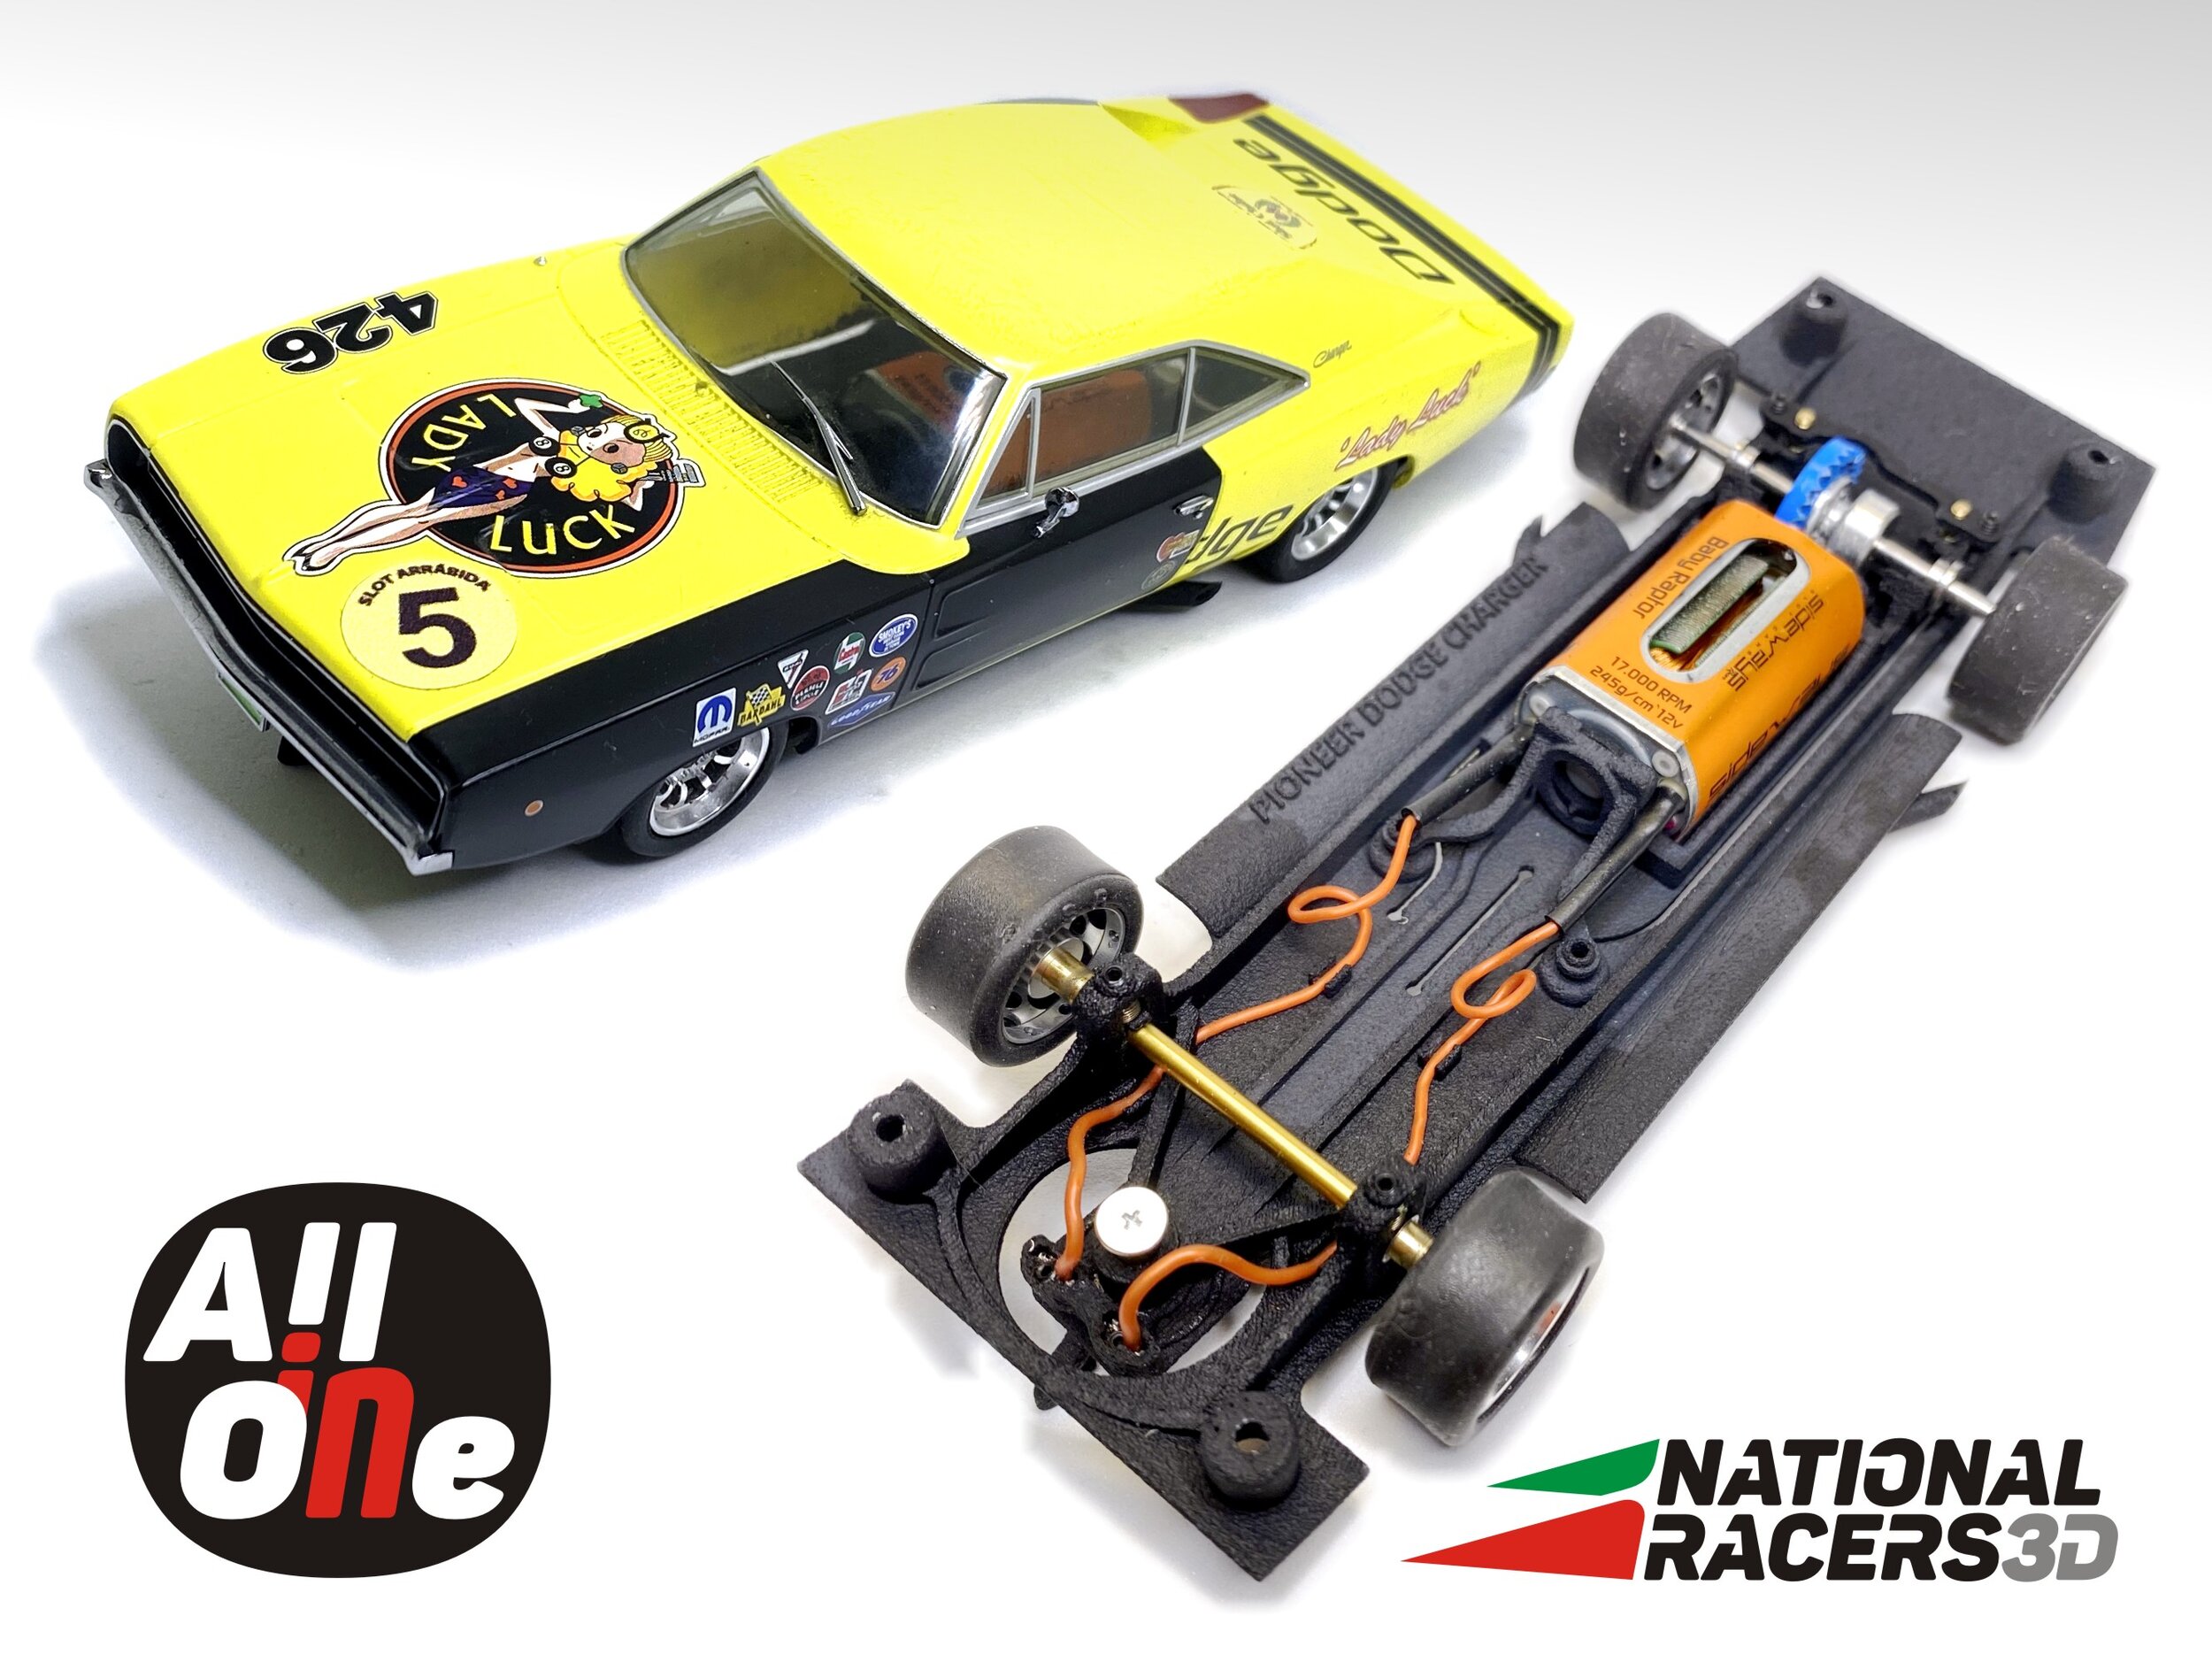 Scx digital or analog dodge charger 2006 chassis 